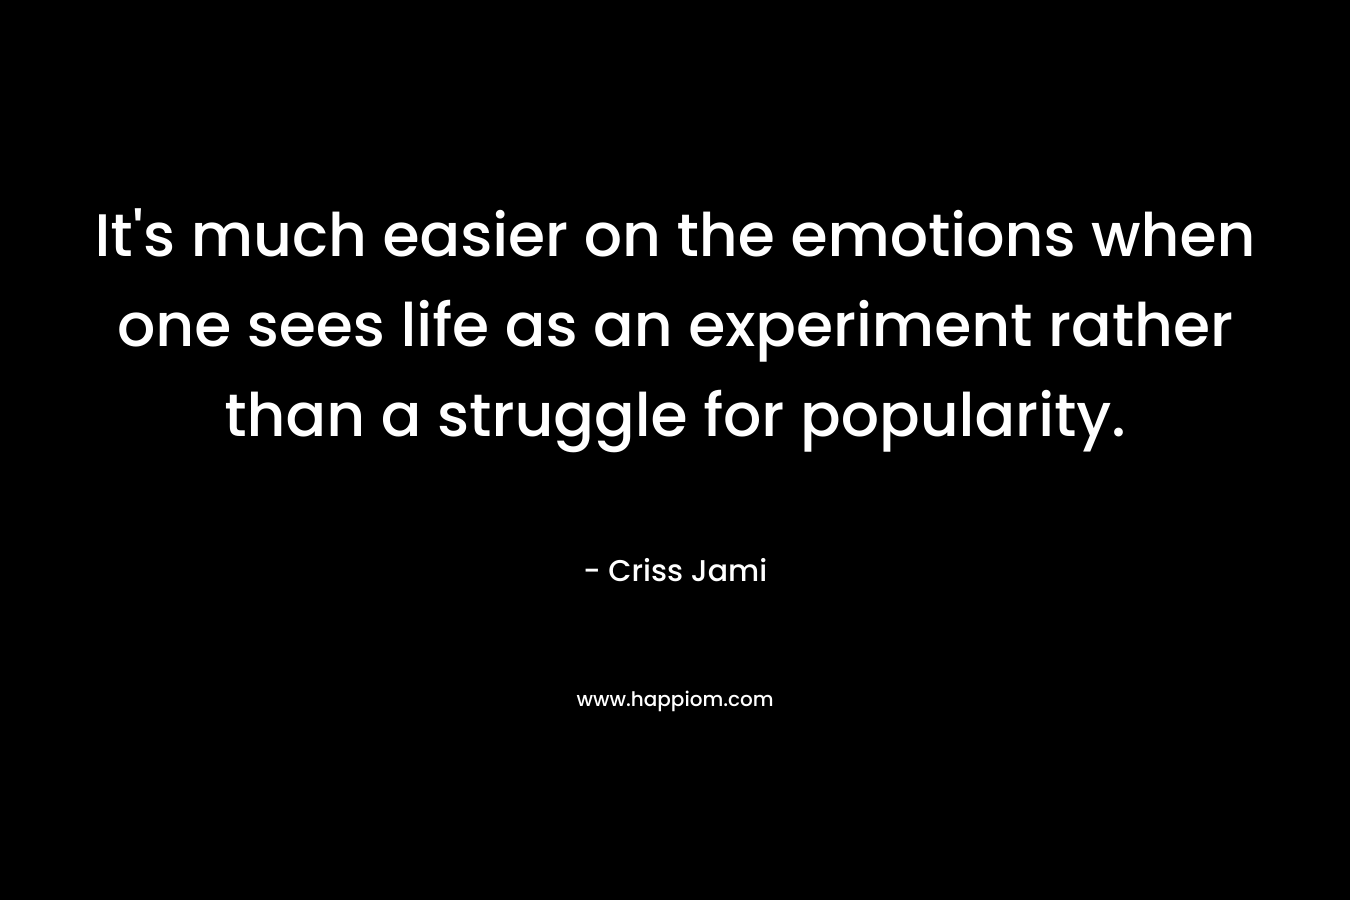 It's much easier on the emotions when one sees life as an experiment rather than a struggle for popularity.